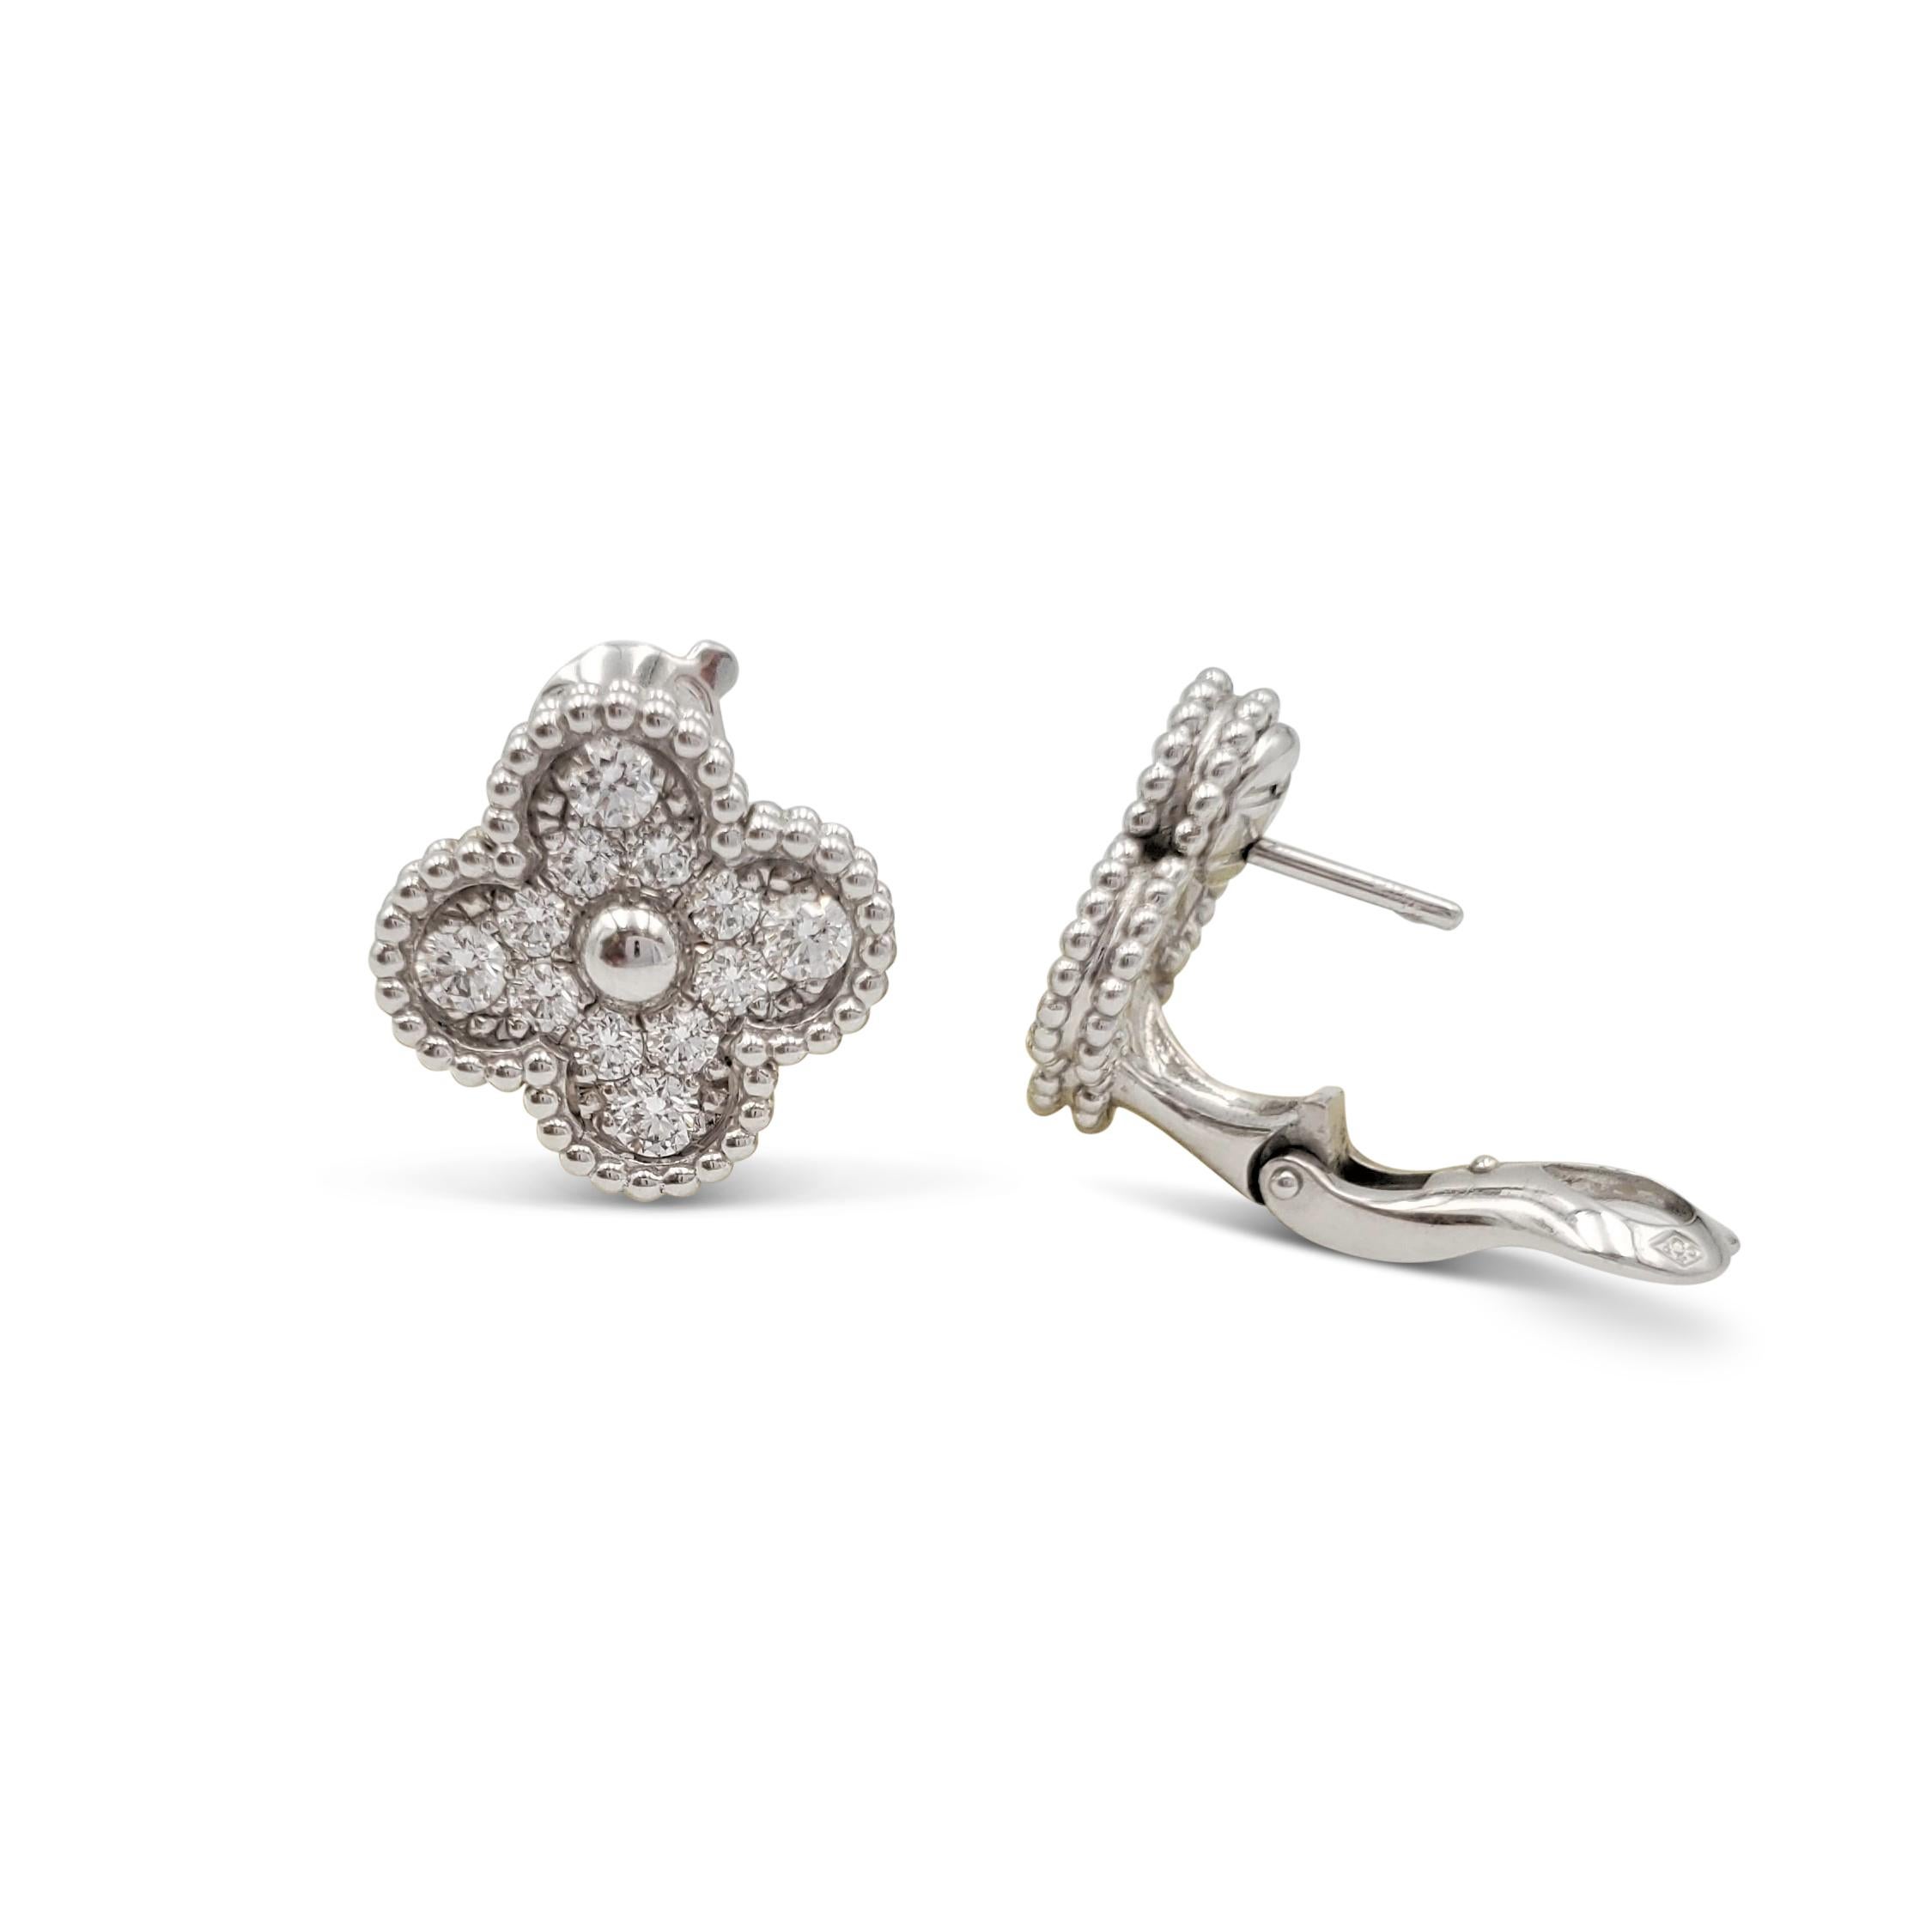 Authentic Van Cleef & Arpels Vintage Alhambra earrings inspired by the clover and crafted in 18 karat white gold set with an estimated 0.88 carats of round brilliant cut diamonds (E-F, VS). Signed VCA, Au750, with serial number. The earrings measure